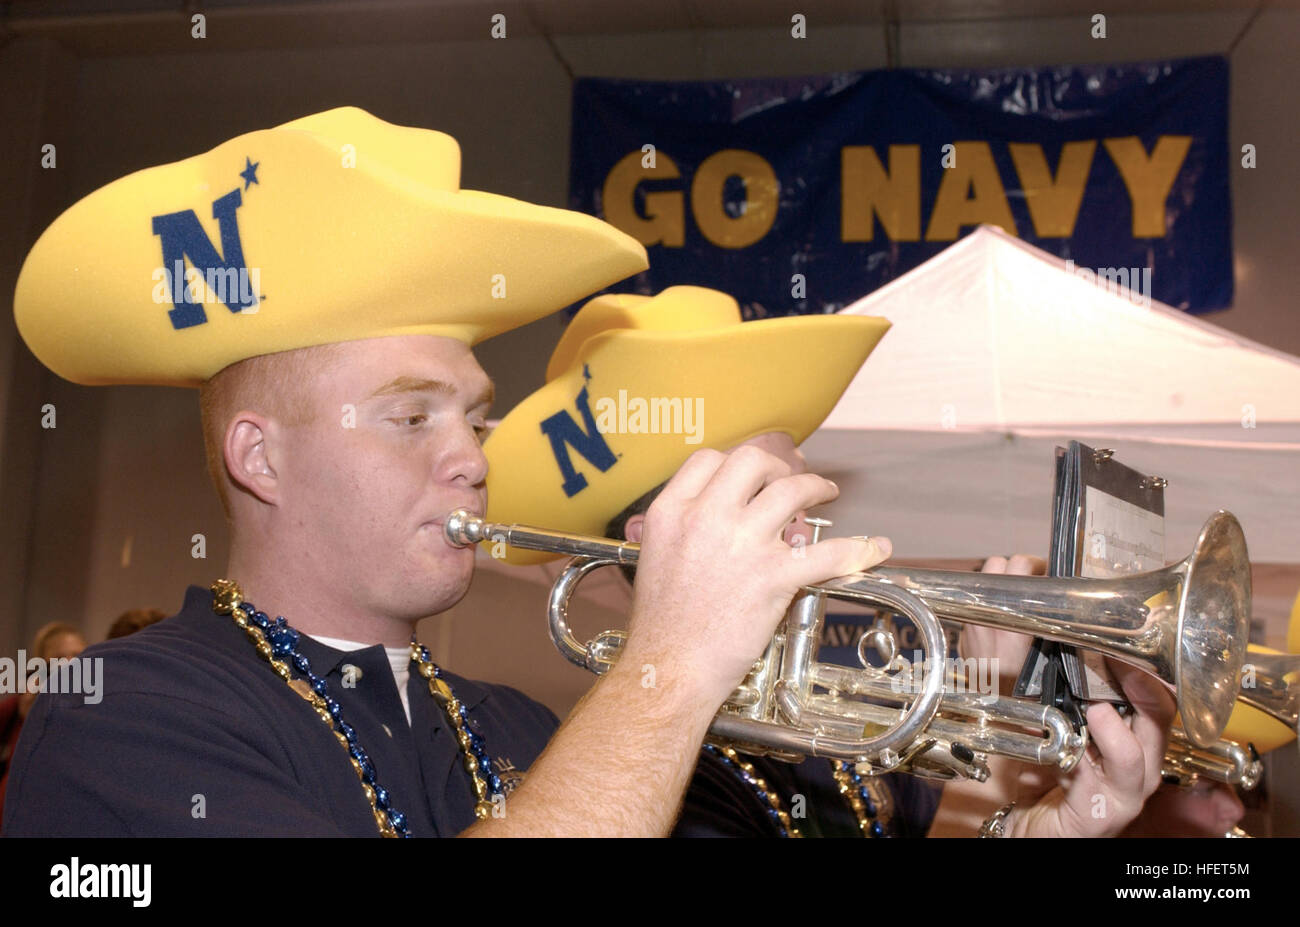 031229-N-9693M-002 Houston, Texas (Dec. 29, 2003) Ð U.S. Naval Academy (U.S.N.A.) Midshipmen 4th Class Jason Pallota, from Daytona, Fla., plays the trumpet during the EV1.Net Rodeo Pep Rally in Reliant Arena.  Navy, 8-4, will play Texas Tech, 7-5, on Dec. 30.  This marks the 10th bowl appearance for Navy with their last bowl match-up in 1996. U.S. Navy photo by Damon J. Moritz.  (RELEASED) US Navy 031229-N-9693M-002 U.S. Naval Academy (U.S.N.A.) Midshipmen 4th Class Jason Pallota, from Daytona, Fla., plays the trumpet during the EV1.Net Rodeo Pep Rally in Reliant Arena Stock Photo